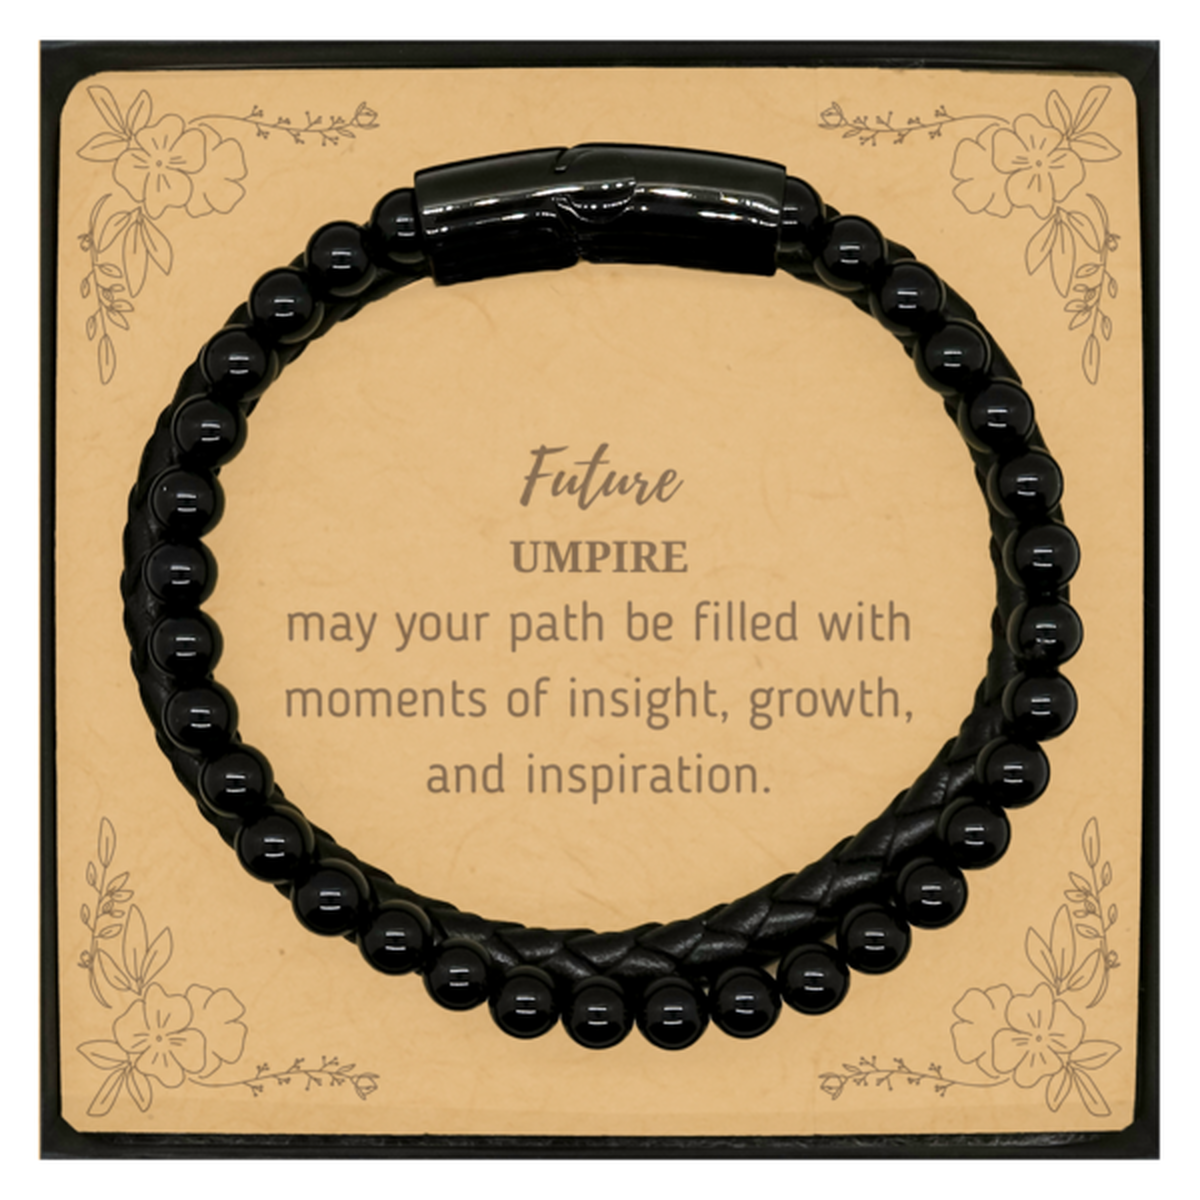 Future Umpire Gifts, May your path be filled with moments of insight, Graduation Gifts for New Umpire, Christmas Unique Stone Leather Bracelets For Men, Women, Friends